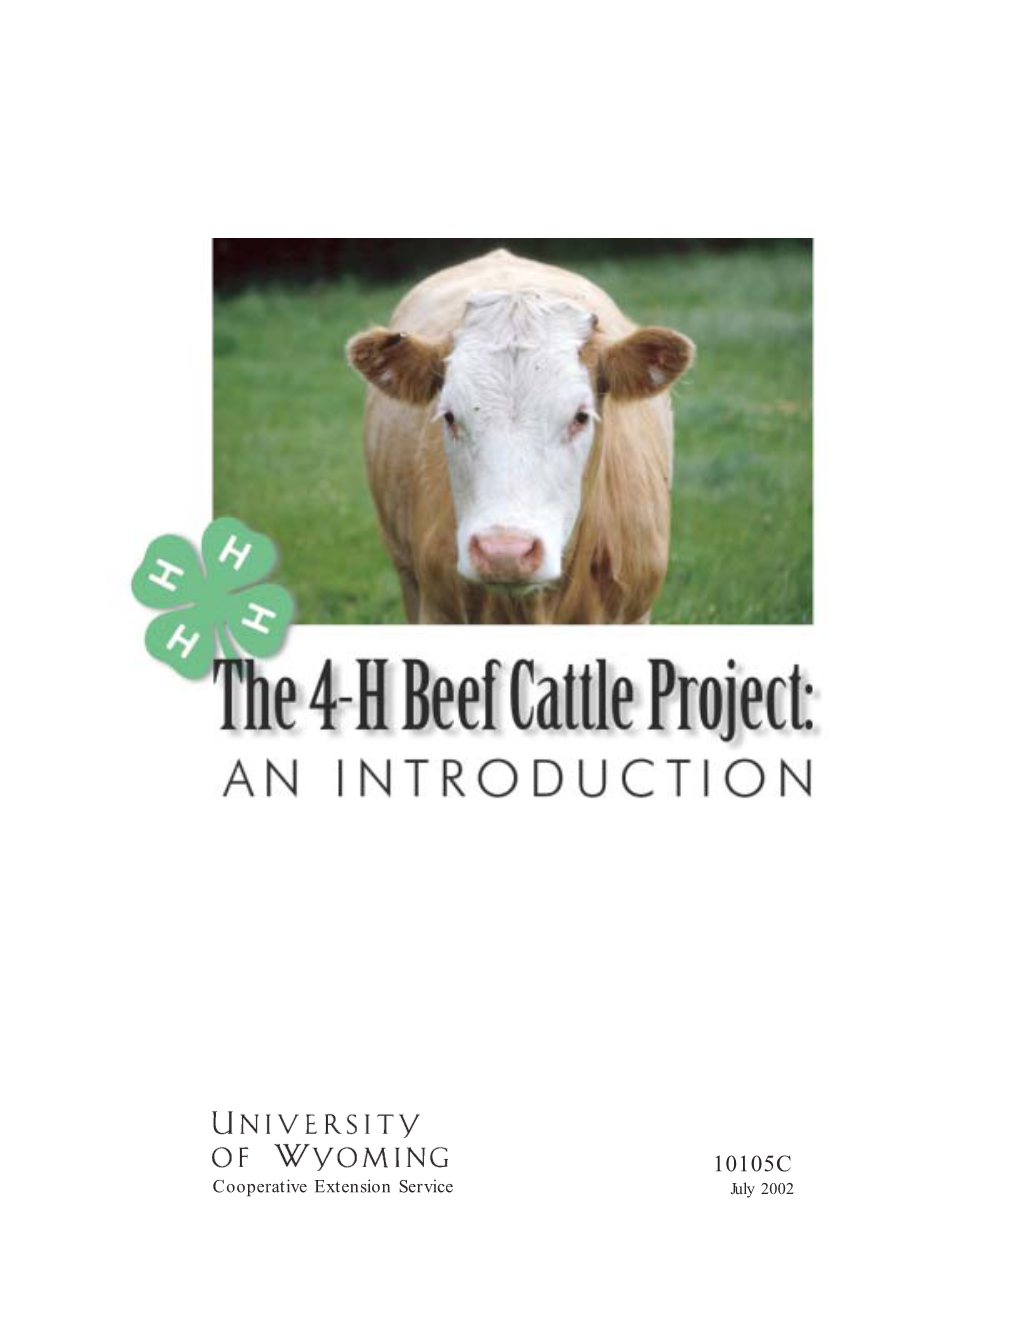 The 4-H Beef Project